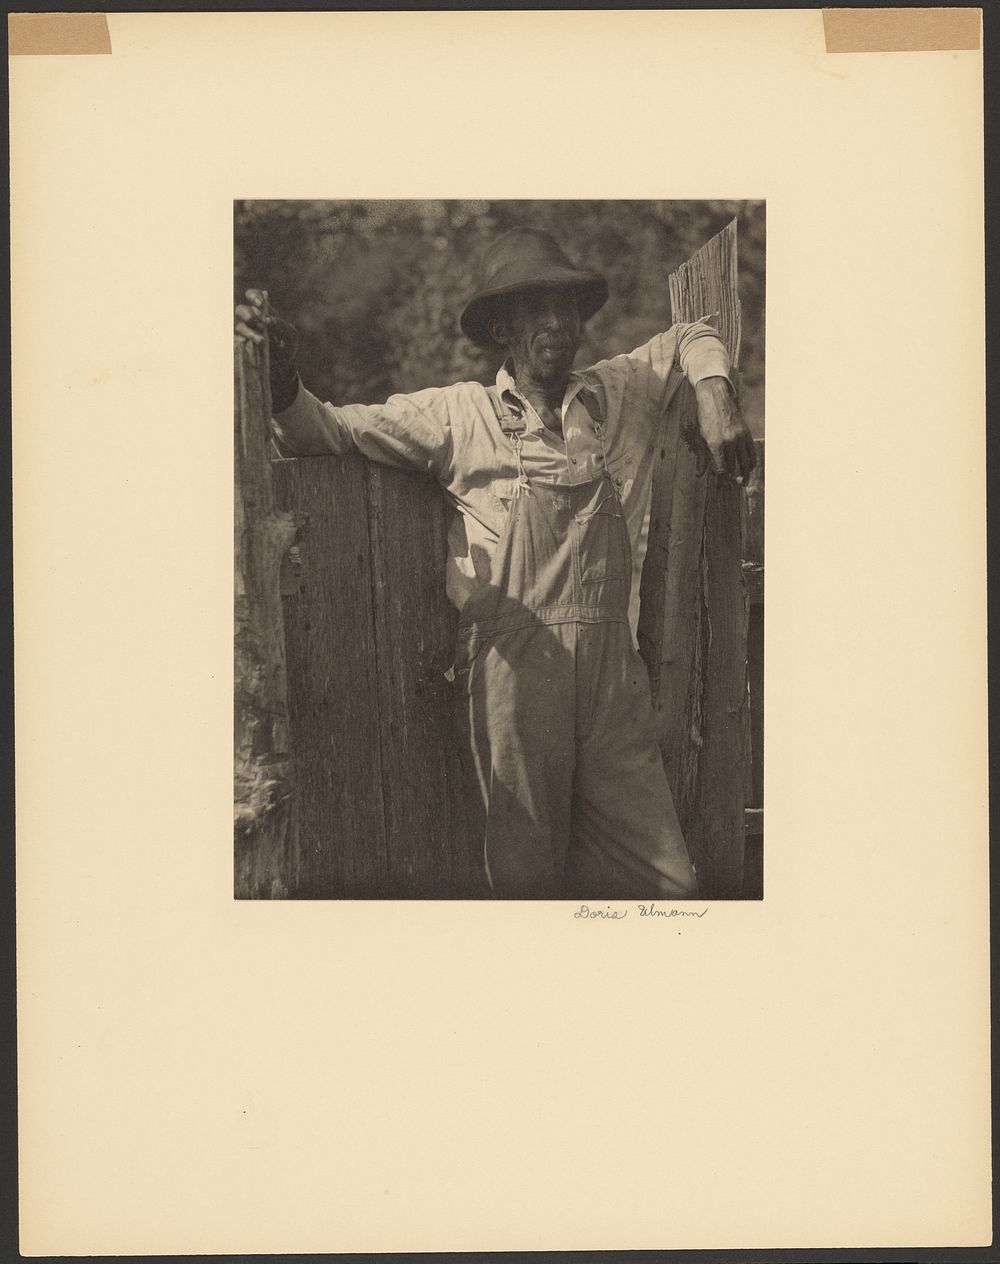 Man in Overalls Leaning Against Old Fence by Doris Ulmann